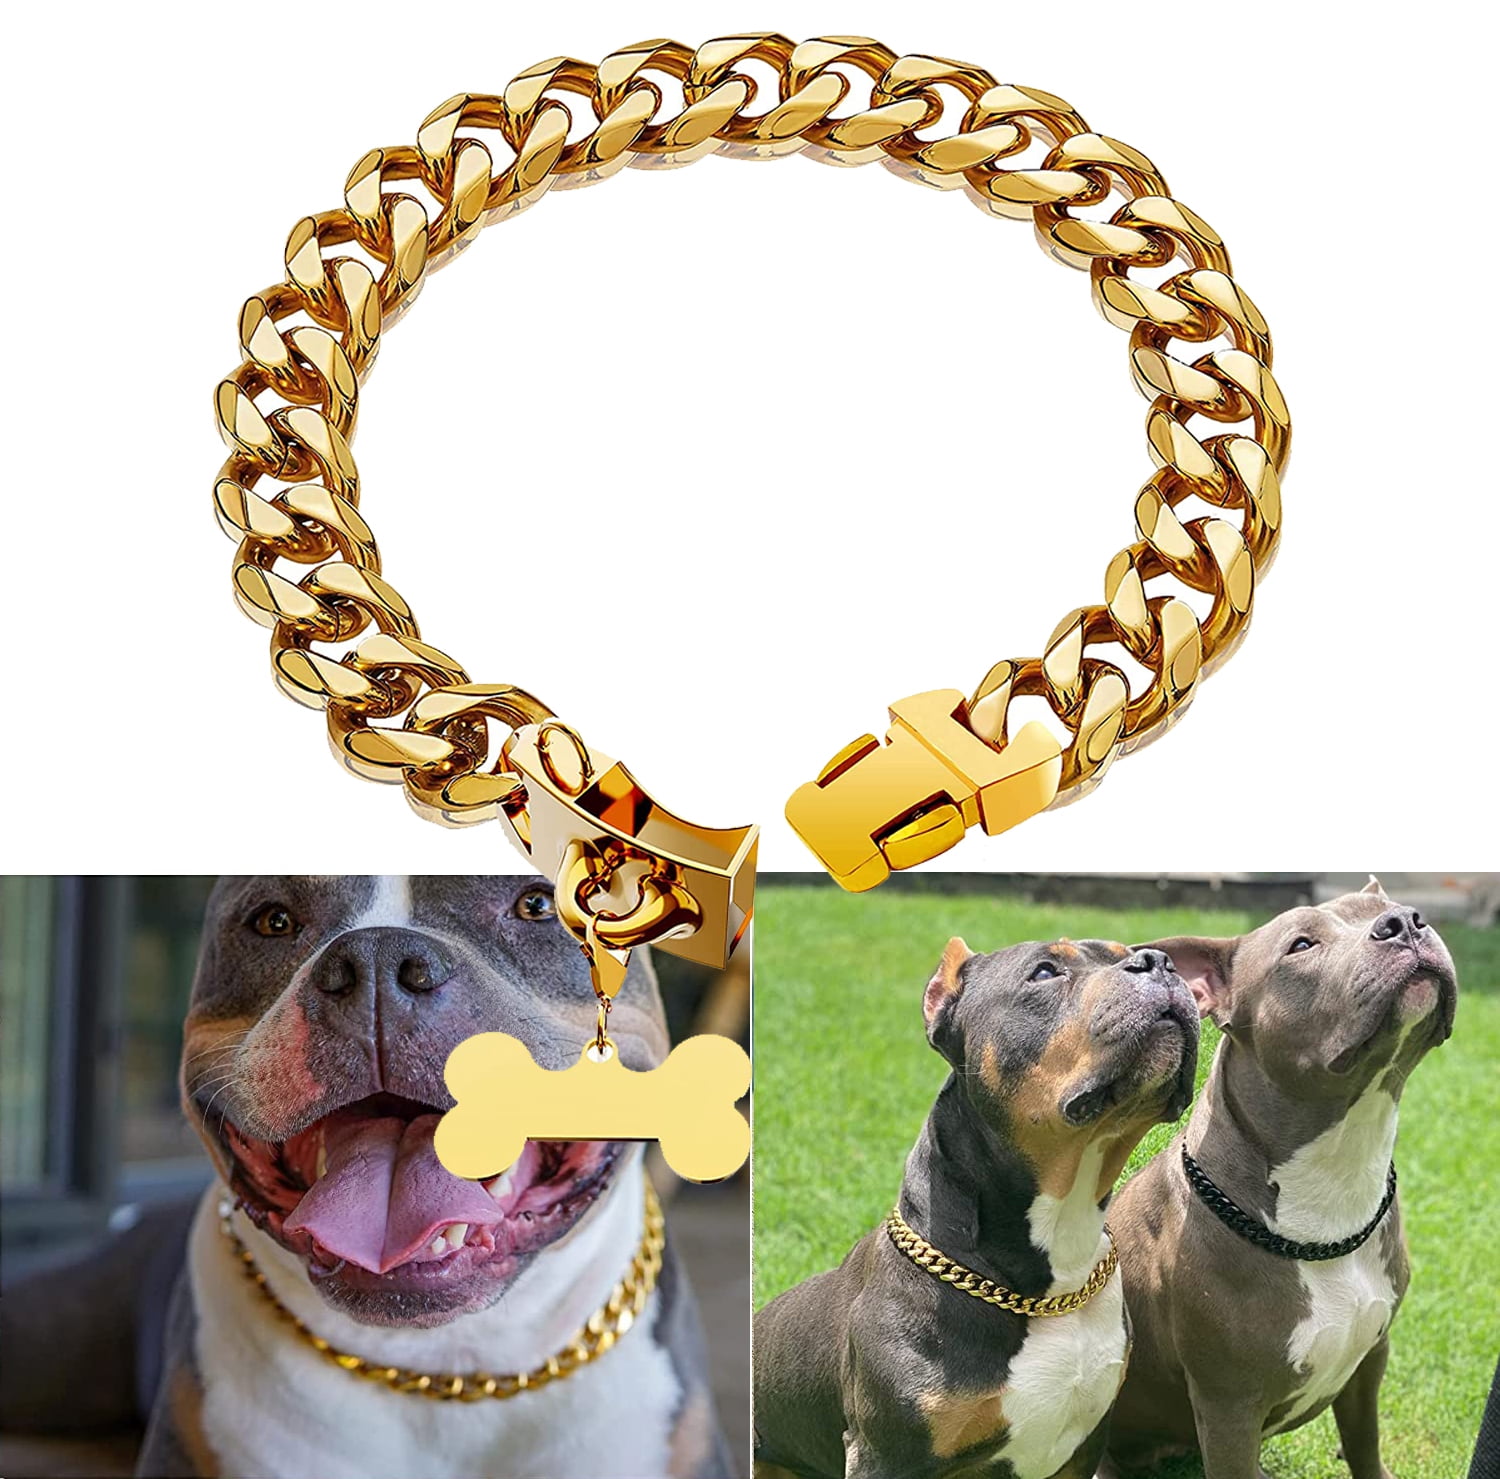  New Gold Chain Dog Collar with Bling Cubic Zirconia Secure  Clasp,15MM Strong Stainless Steel Cuban Link Chain Collars,Luxury Necklace  Walking Collar for Small Medium Dogs : Pet Supplies